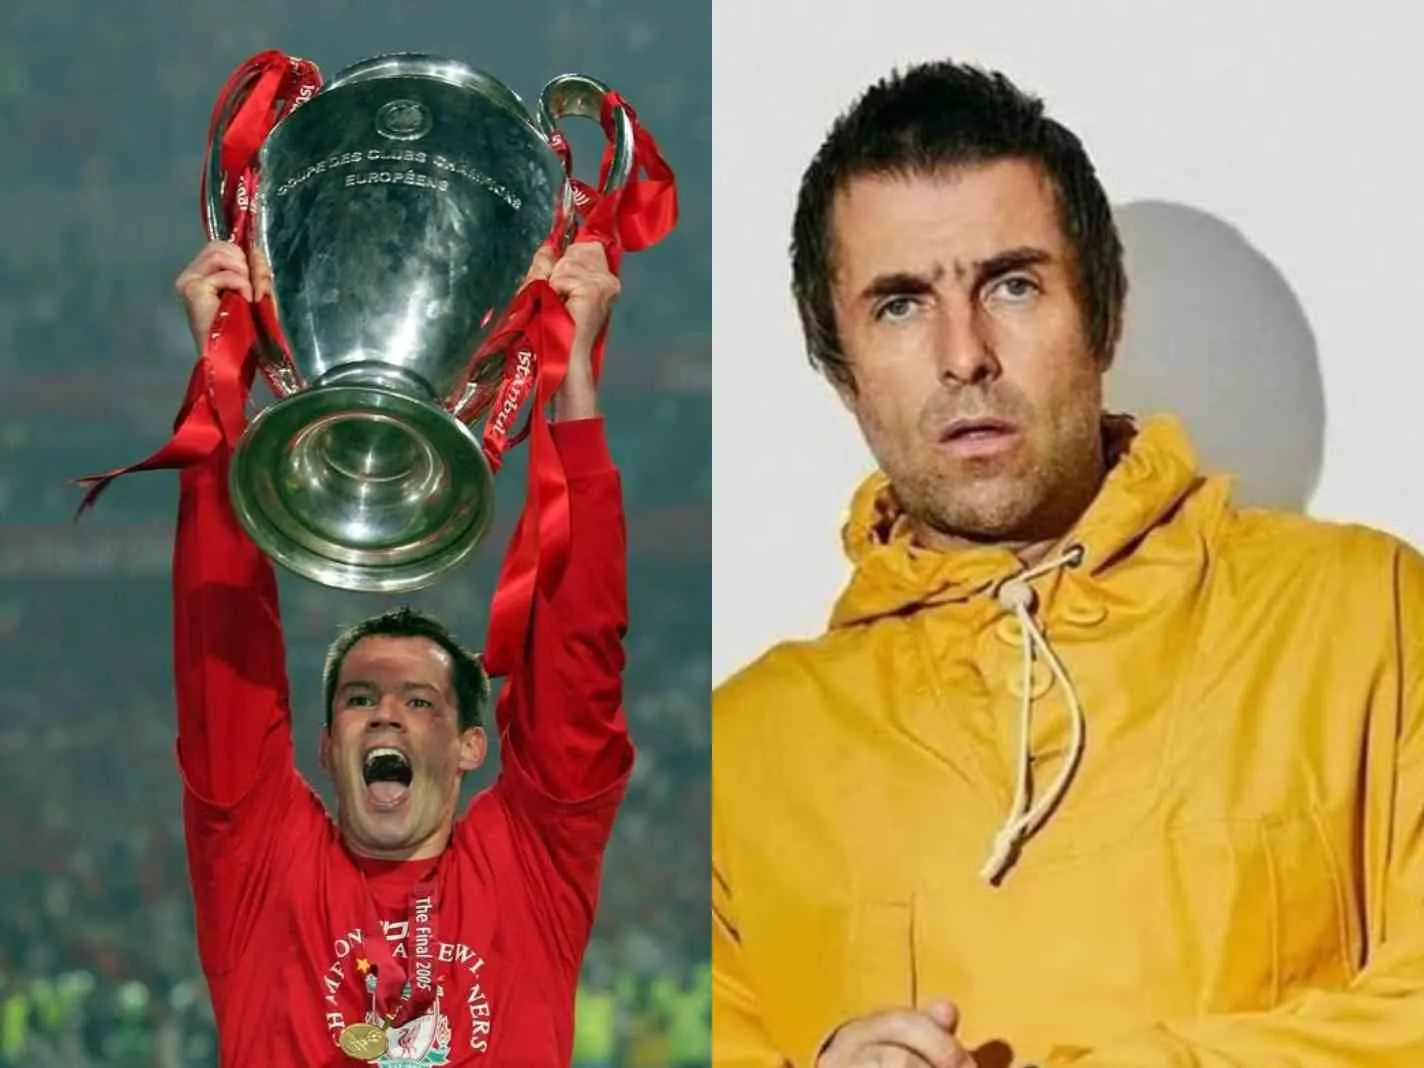 The photo shows Jamie Carragher holding a Champions League trophy and Man City superfan Liam Gallagher